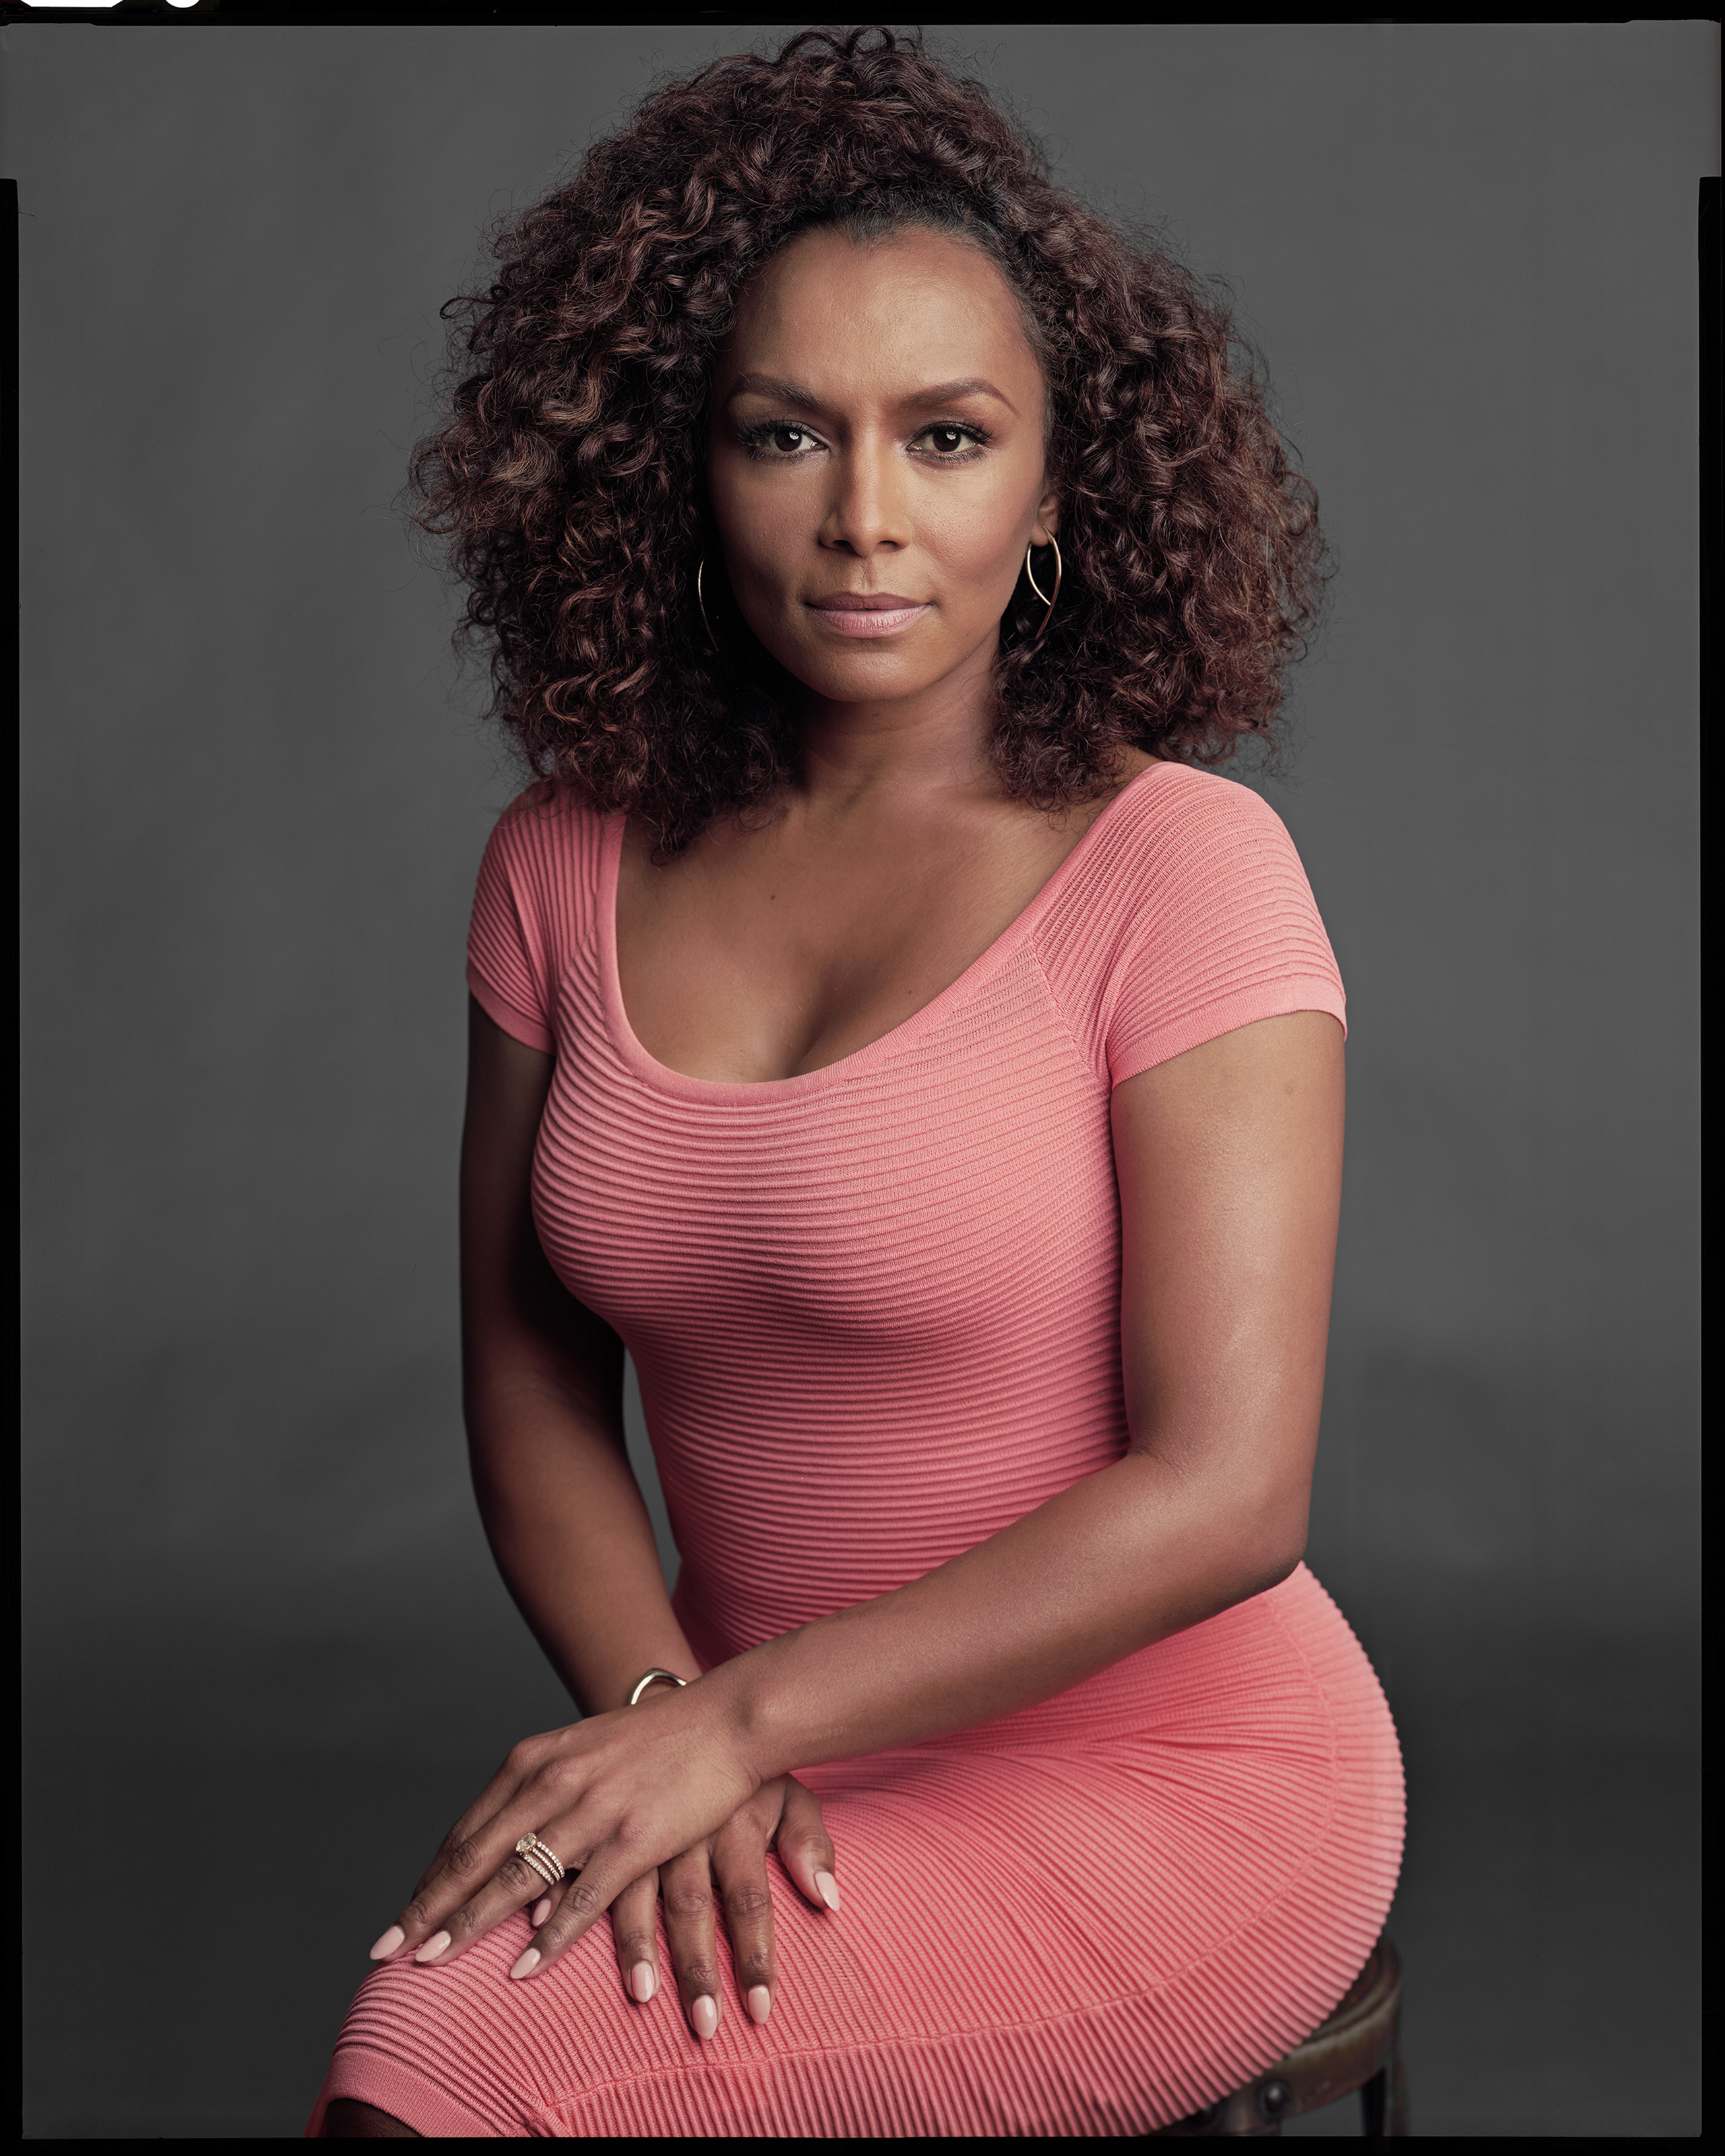 N Xxx Cm Video Hd - Janet Mock: What Trump Election Means for Transgender People | Time